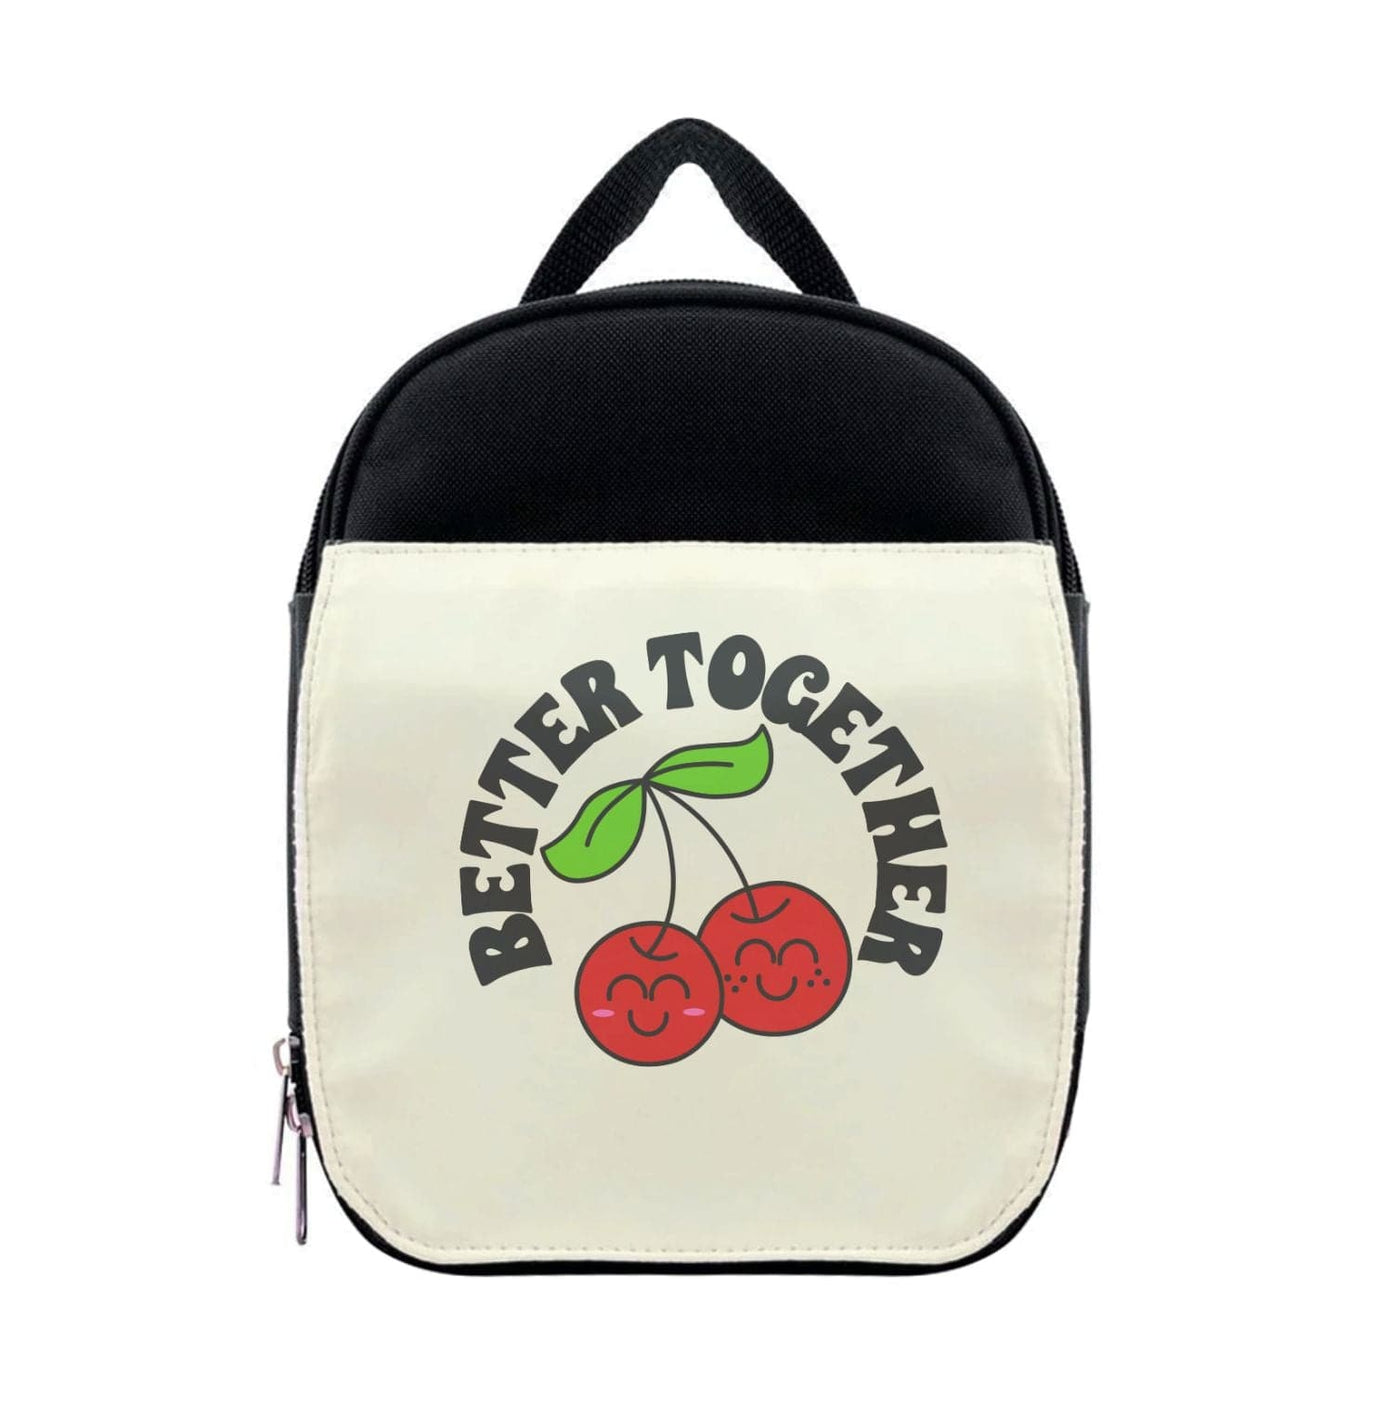 Better Together - Valentine's Day Lunchbox